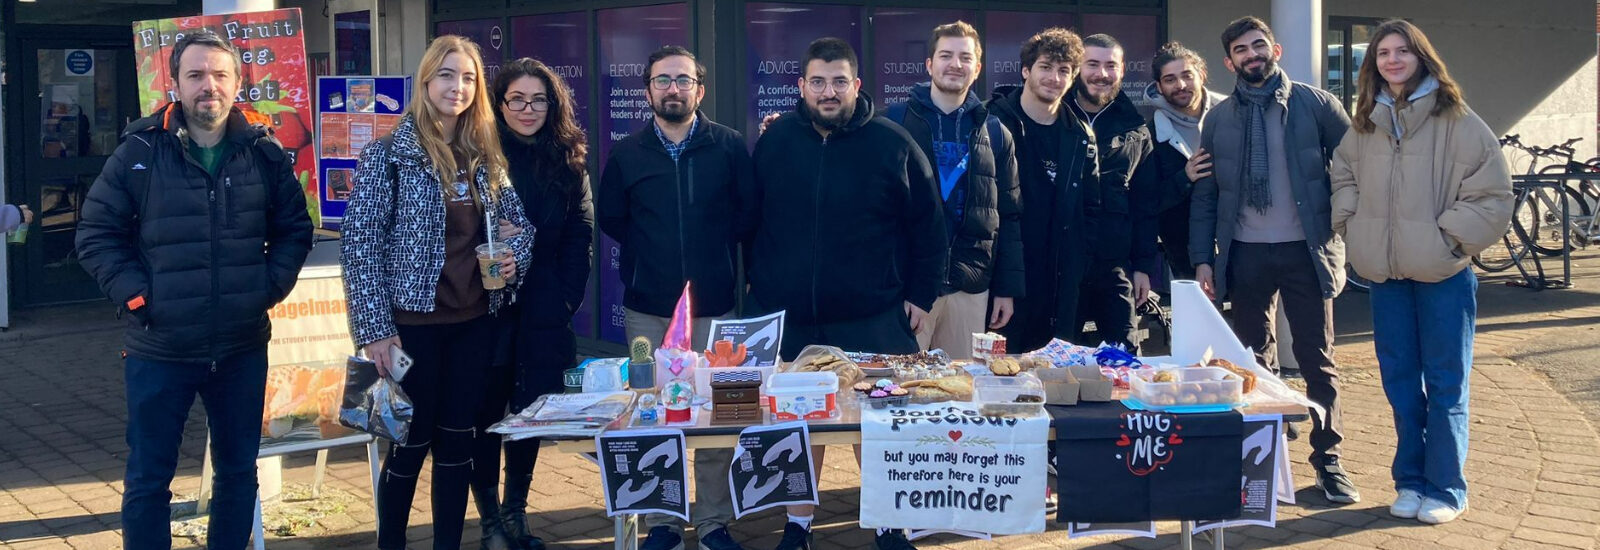 Members of the Turkish Society standing behind a table selling cakes to fundraise